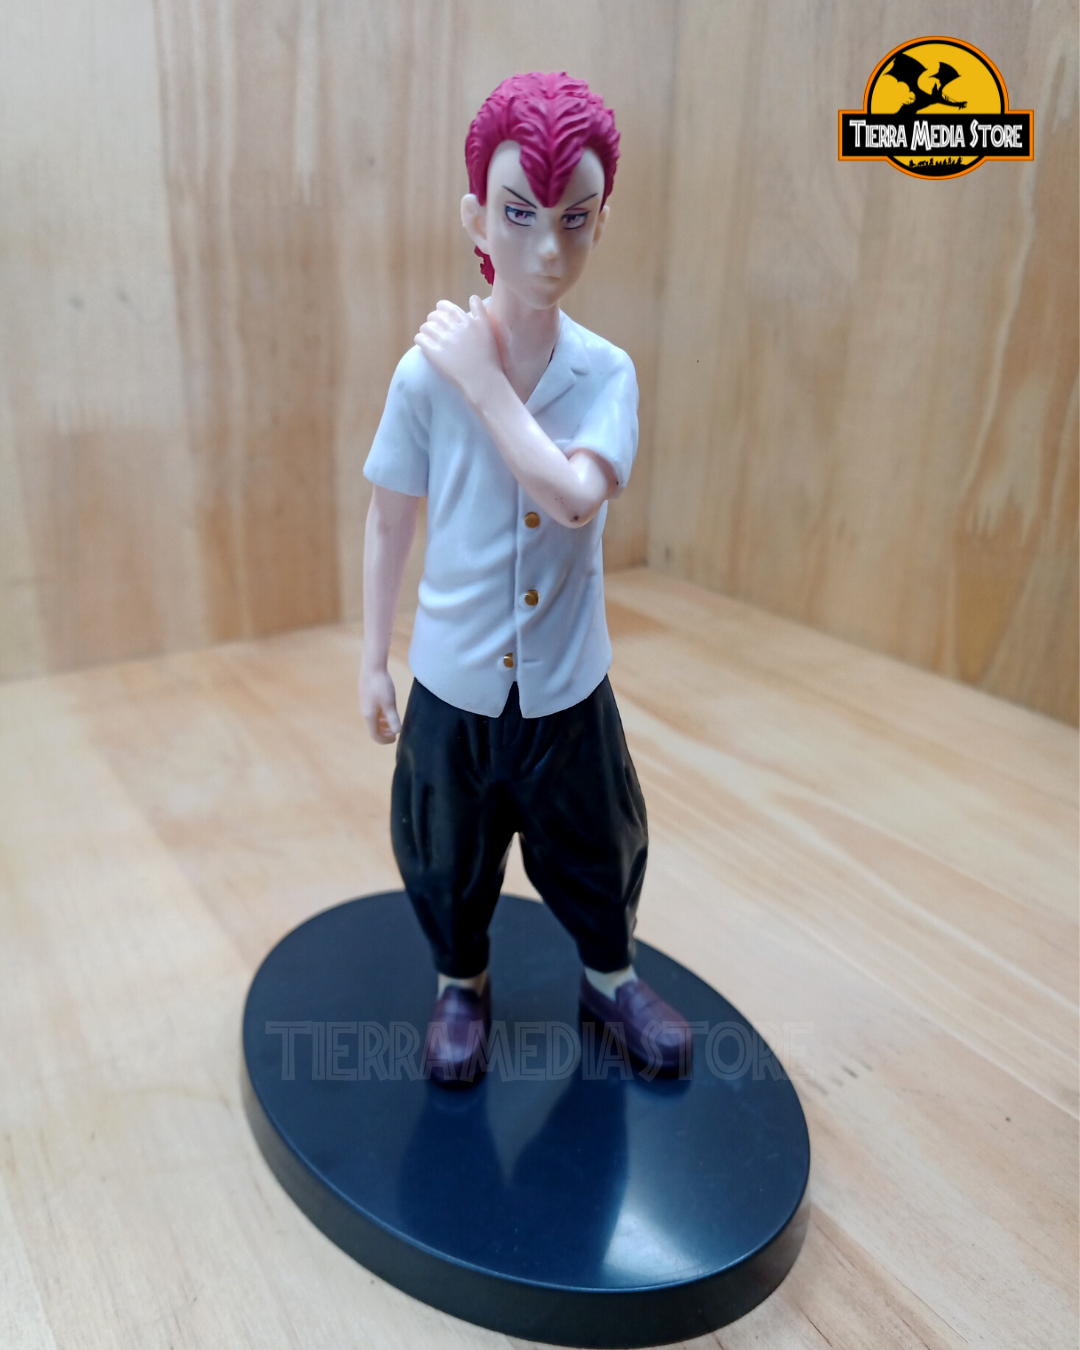 Tokyo Revengers Synthetic Leather Pass Case Atsushi Sendo Deformed Ver.  (Anime Toy) - HobbySearch Anime Goods Store